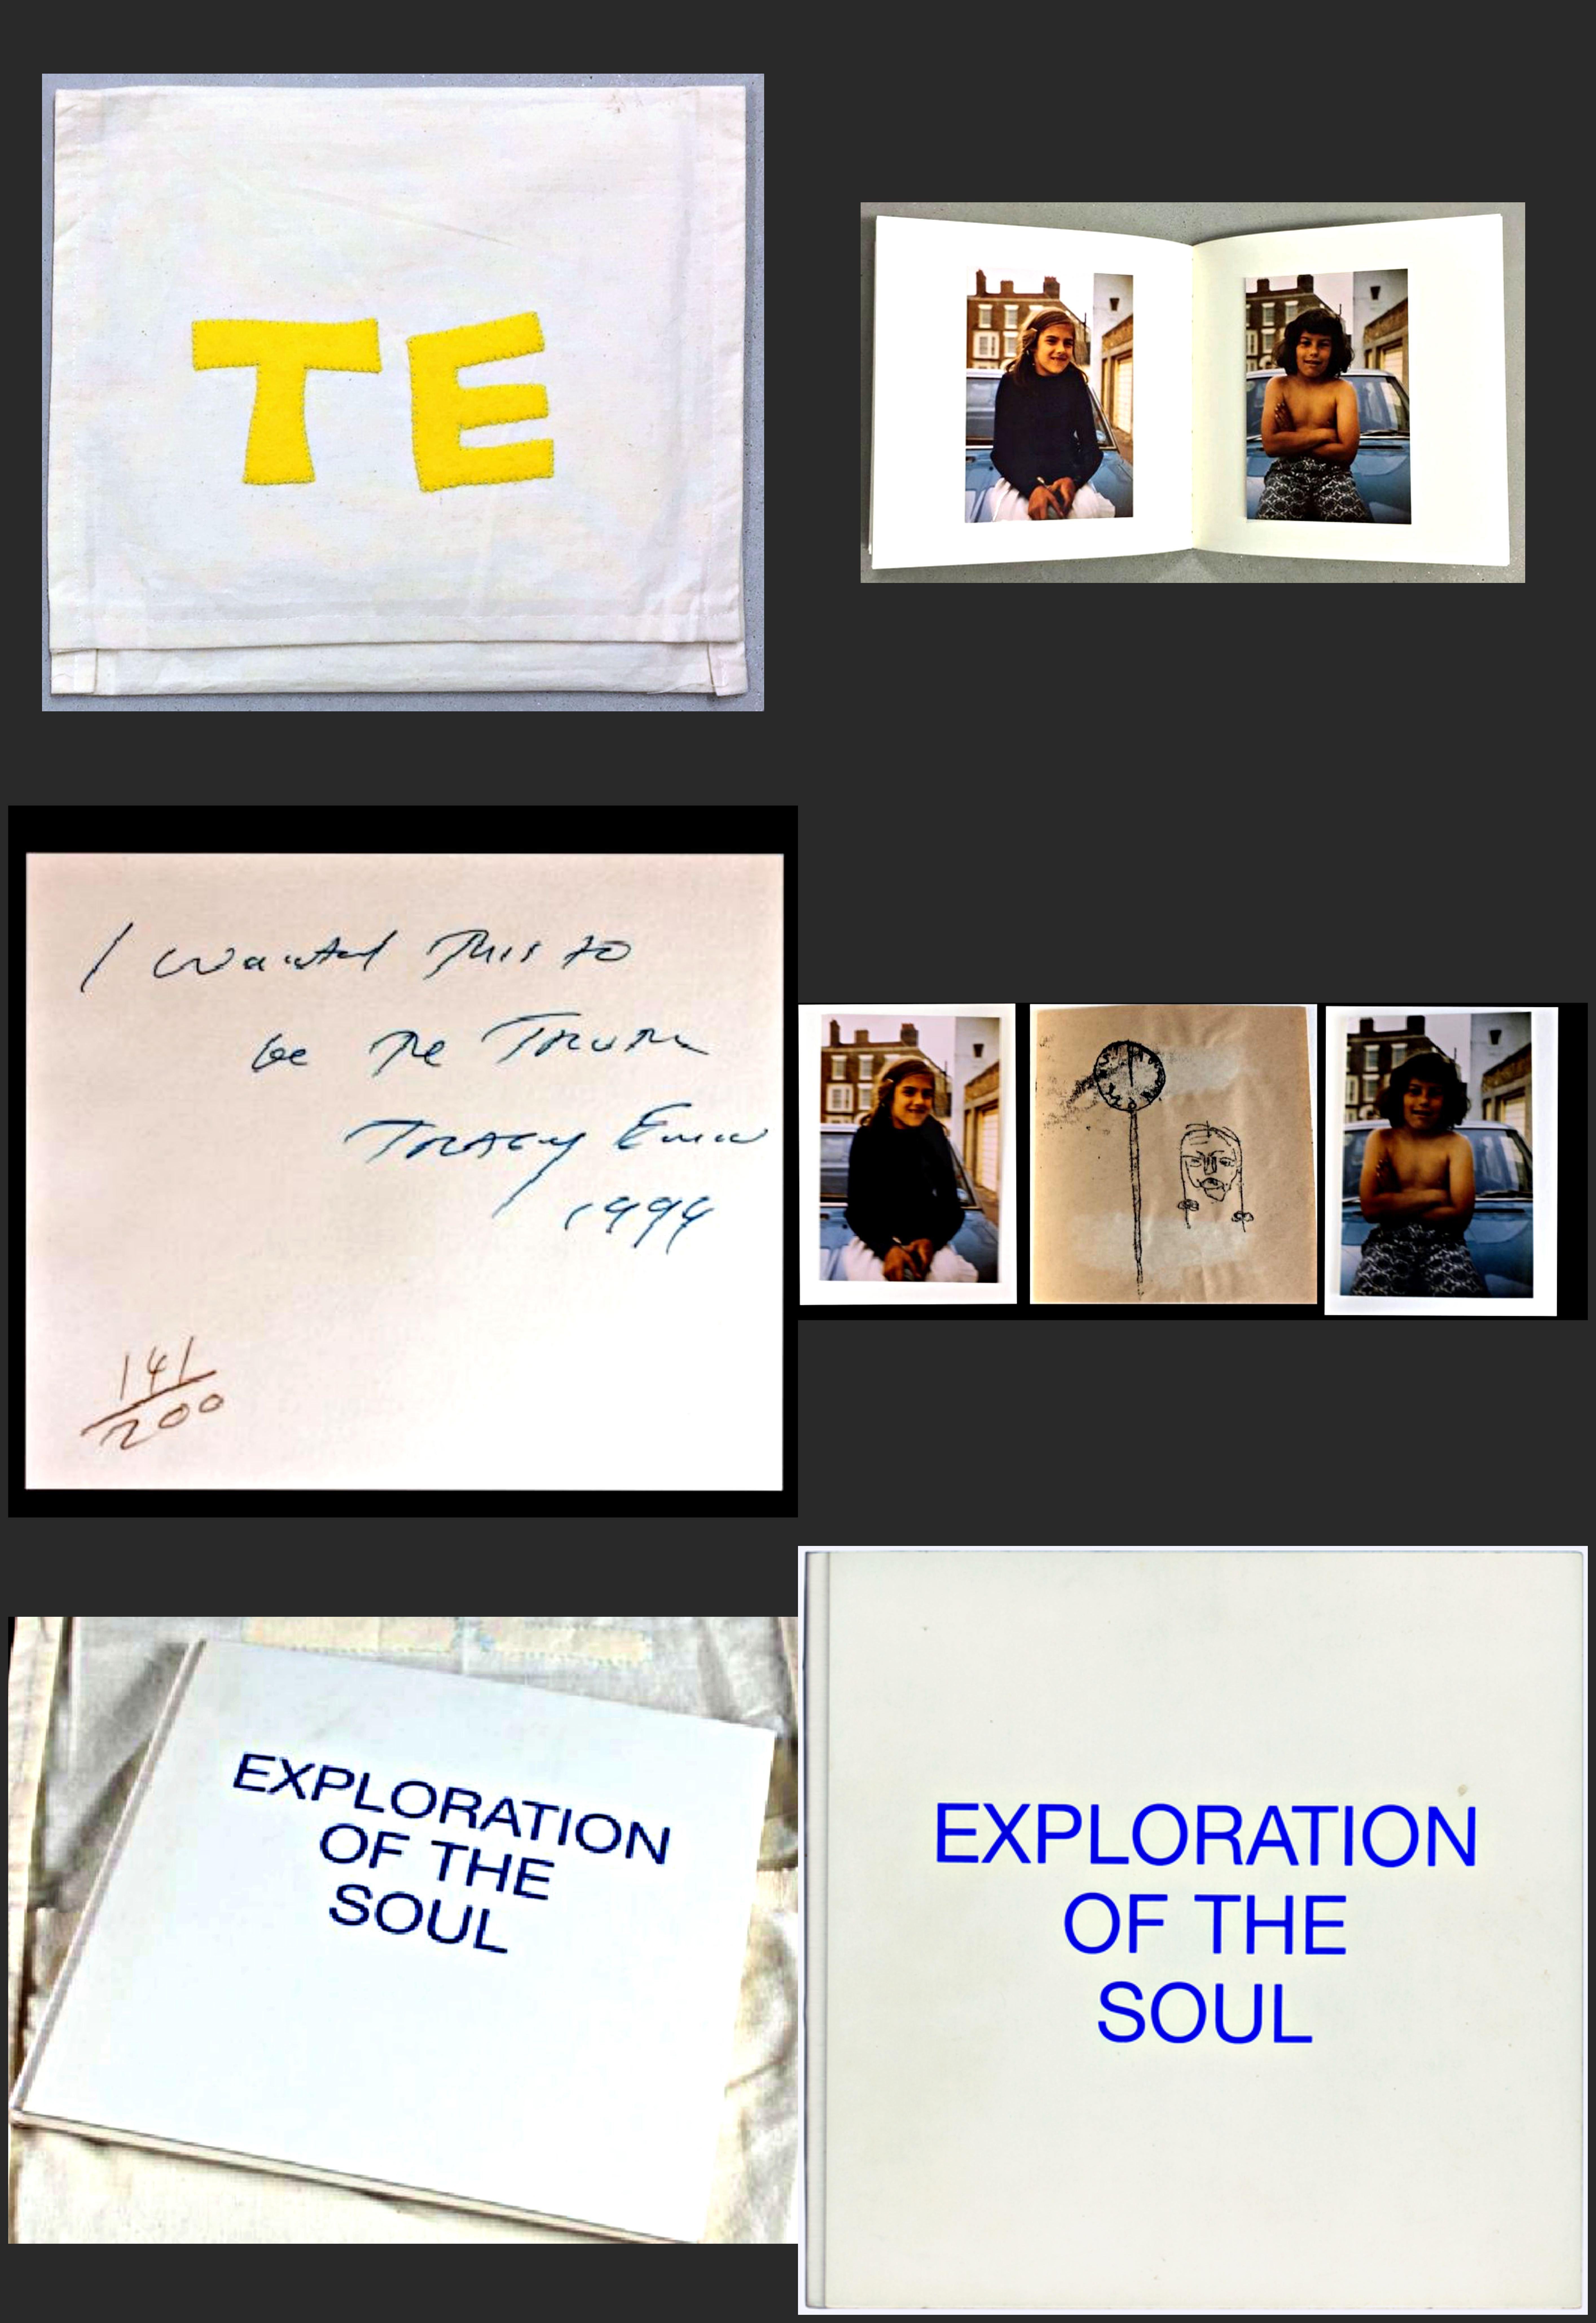 Tracey Emin
Exploration of the Soul from the Estate of Warhol's Agent, 1994
Tipped-in monoprint (unique) and ink inscription held in Hand signed and numbered (edition of 200) & ink inscribed monograph in White cloth-backed boards, plus hand sewn